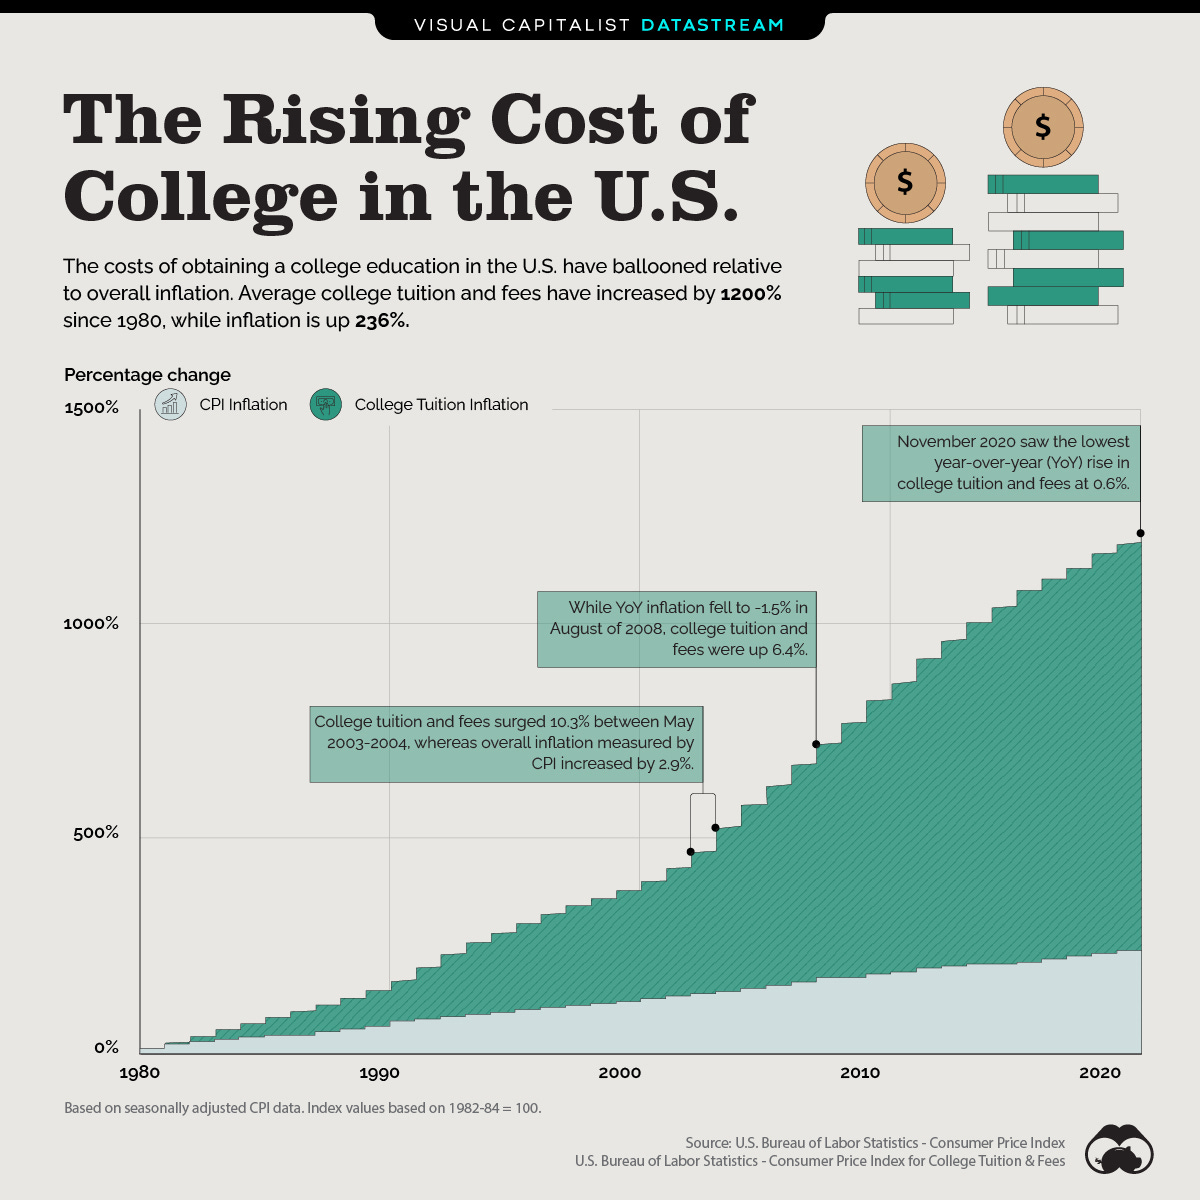 https://www.visualcapitalist.com/wp-content/uploads/2021/02/Rise-of-College-Tuition_Datastream-1.jpg